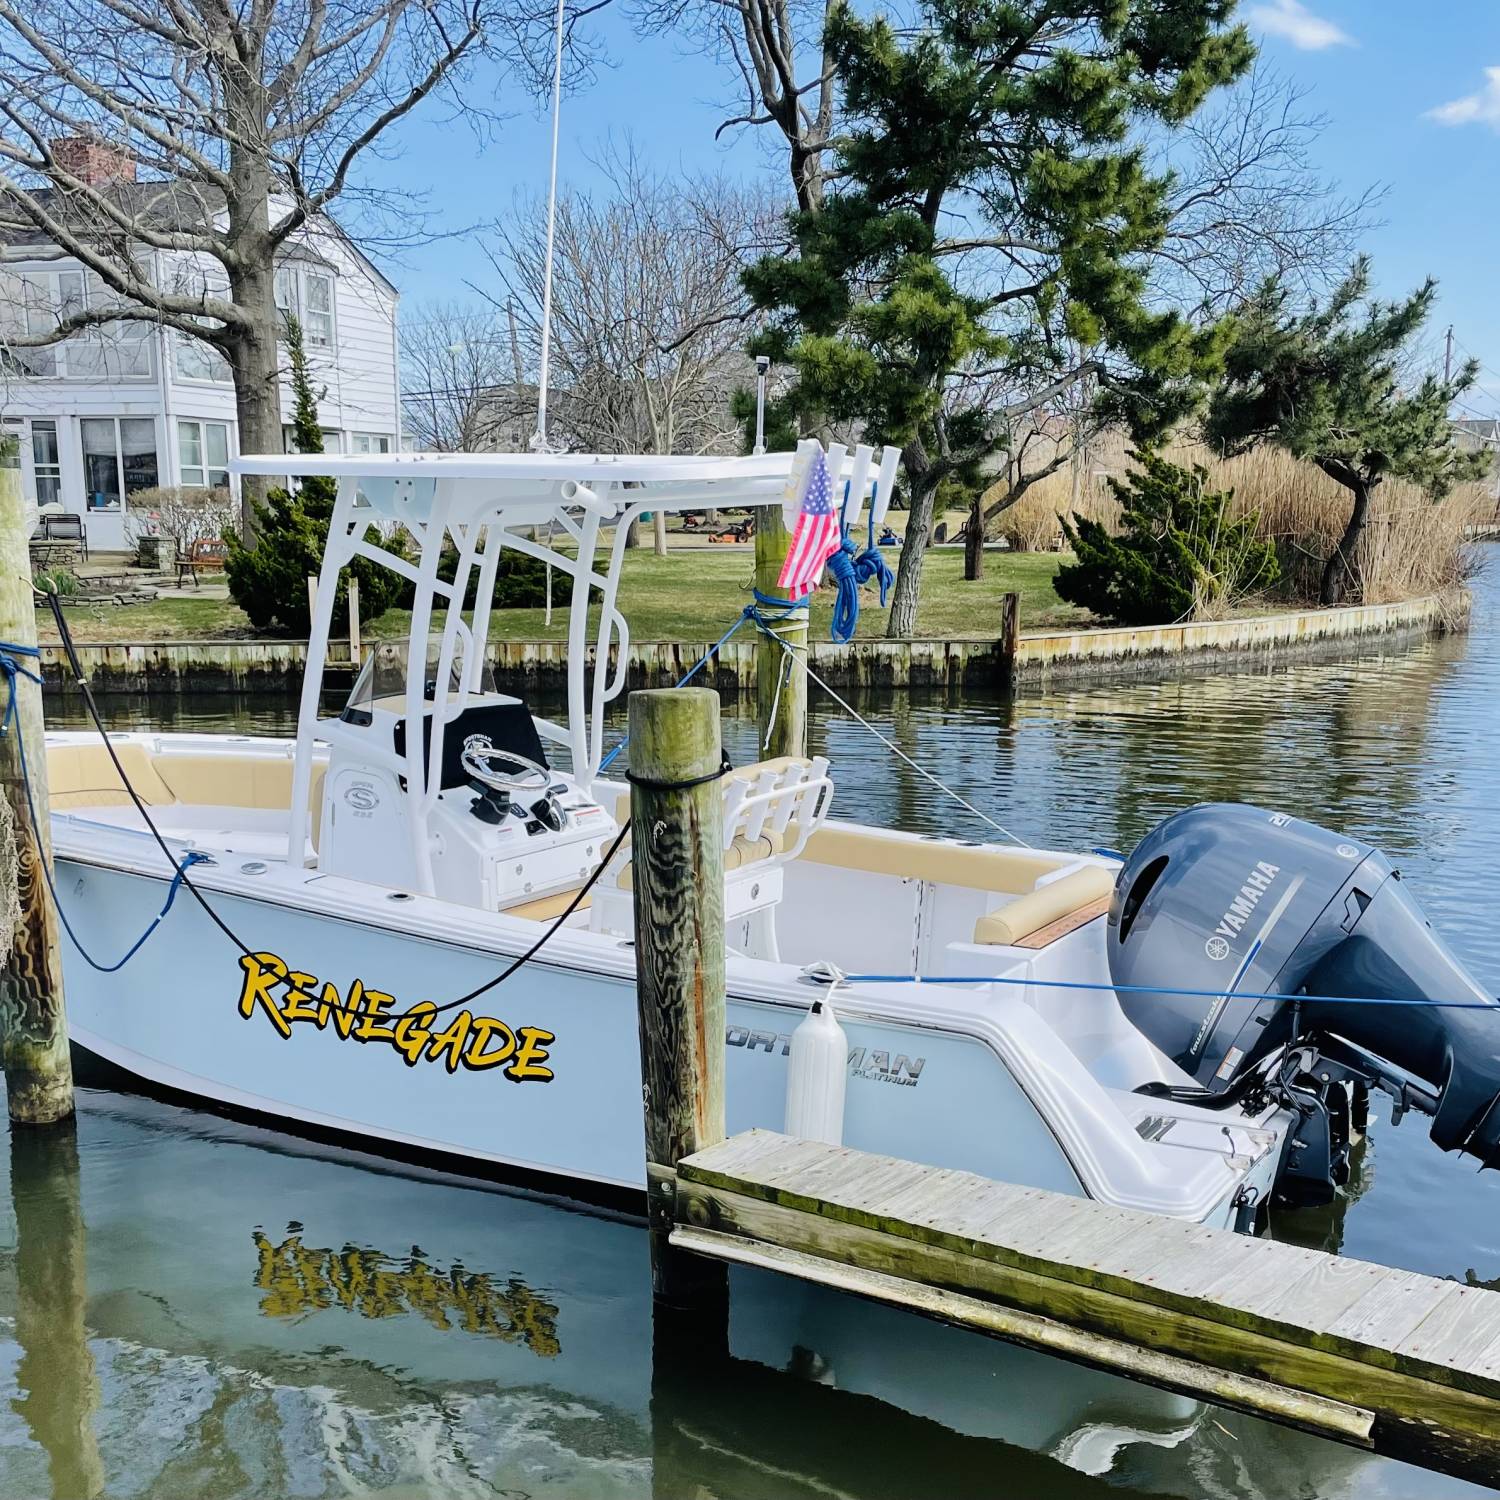 Title: Renegade - On board their Sportsman Open 232 Center Console - Location: Green’s Creek Marina, Sayville. Participating in the Photo Contest #SportsmanMay